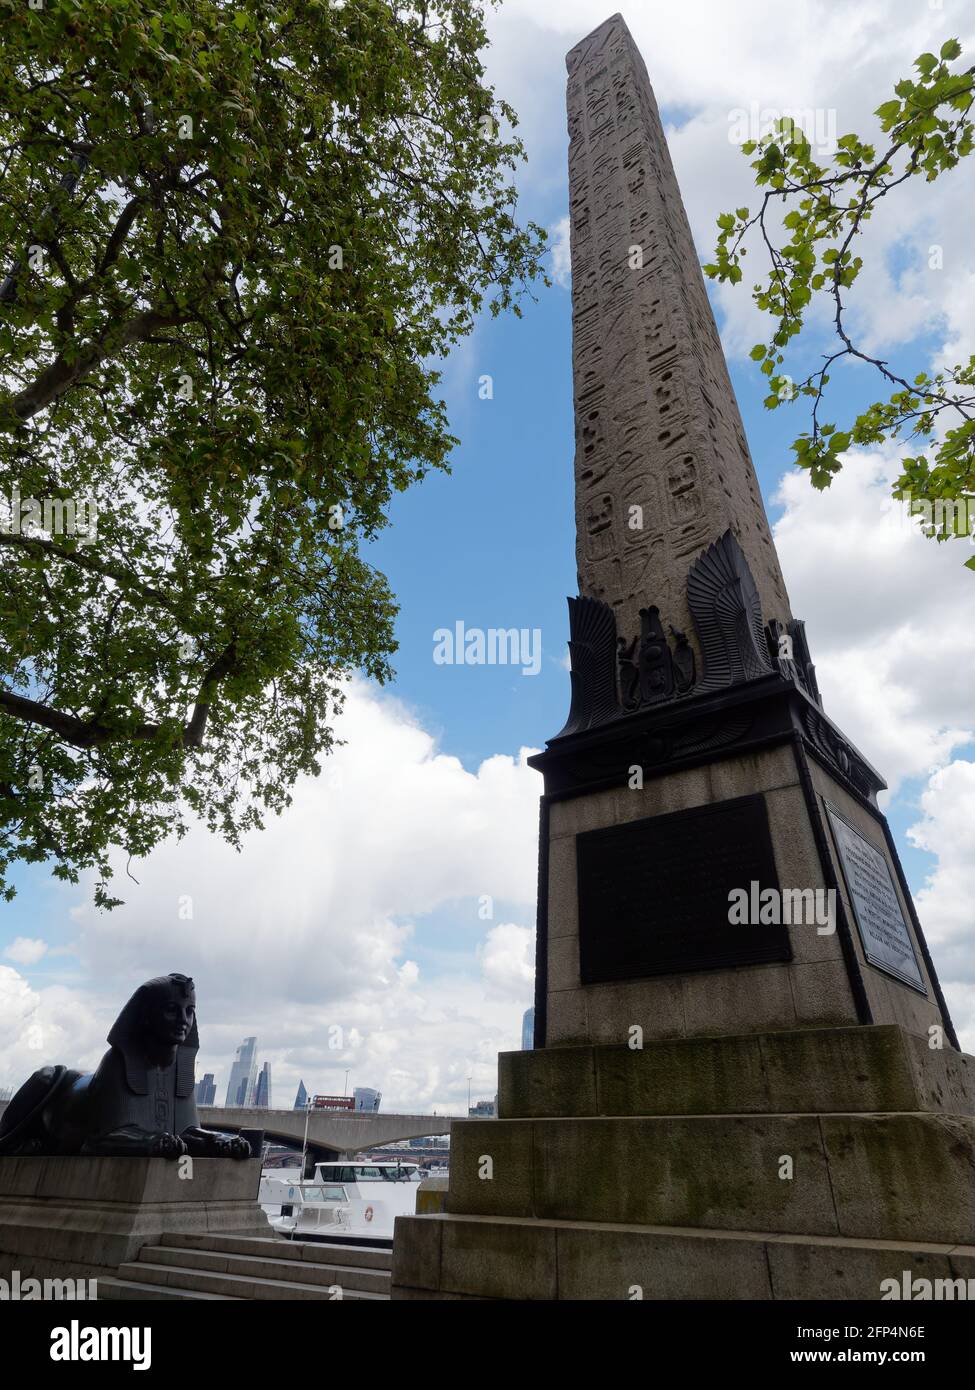 London, Greater London, England - May 18 2021: Cleopatras Needle an Eqyption Obelisk and a bronze Spinx statue near Embankment Gardens. Stock Photo